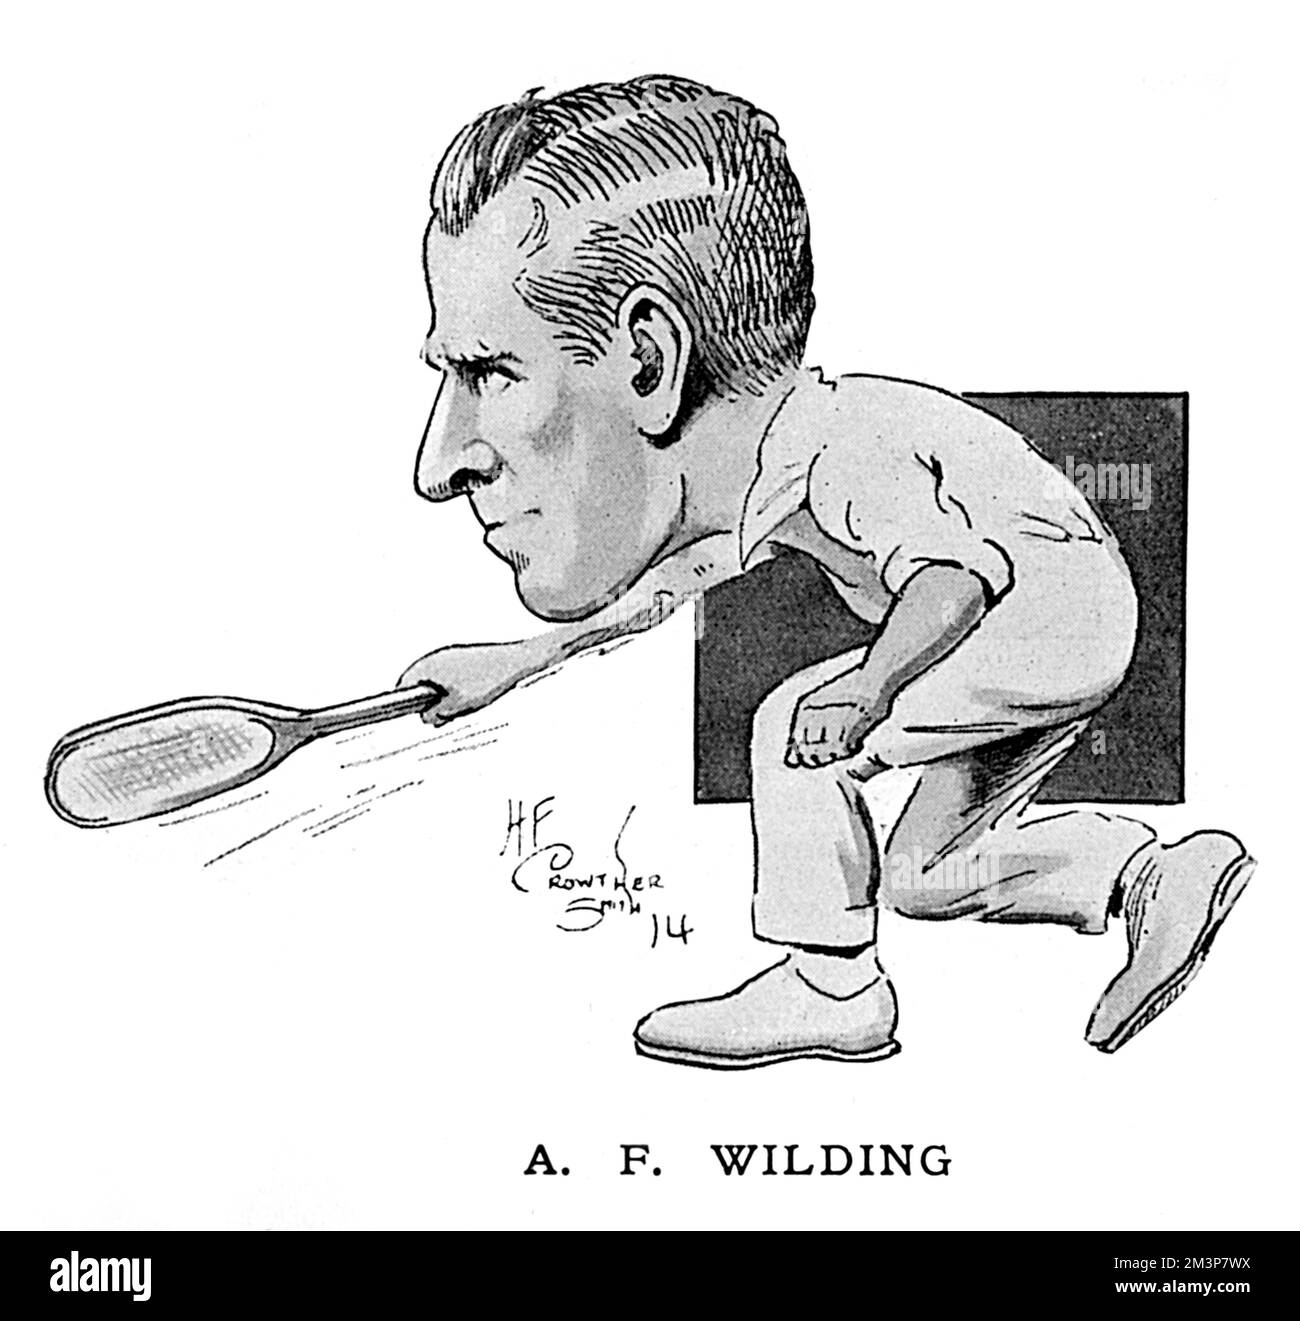 New Zealand tennis player, Anthony Frederick Wilding, Wimbledon Mens Champion in 1910, 1911, 1912 and 1913. His championship run came to an end in 1914 when he was beaten by Australian, N. E. Brookes in three straight sets. Wilding died near Neuve Chapelle, France on 9 May 1915 while fighting in the Battle of Aubers Ridge.  Caricatured here by H. F. Crowther Smith in the year he lost to Norman Brookes.       Date: 1914 Stock Photo